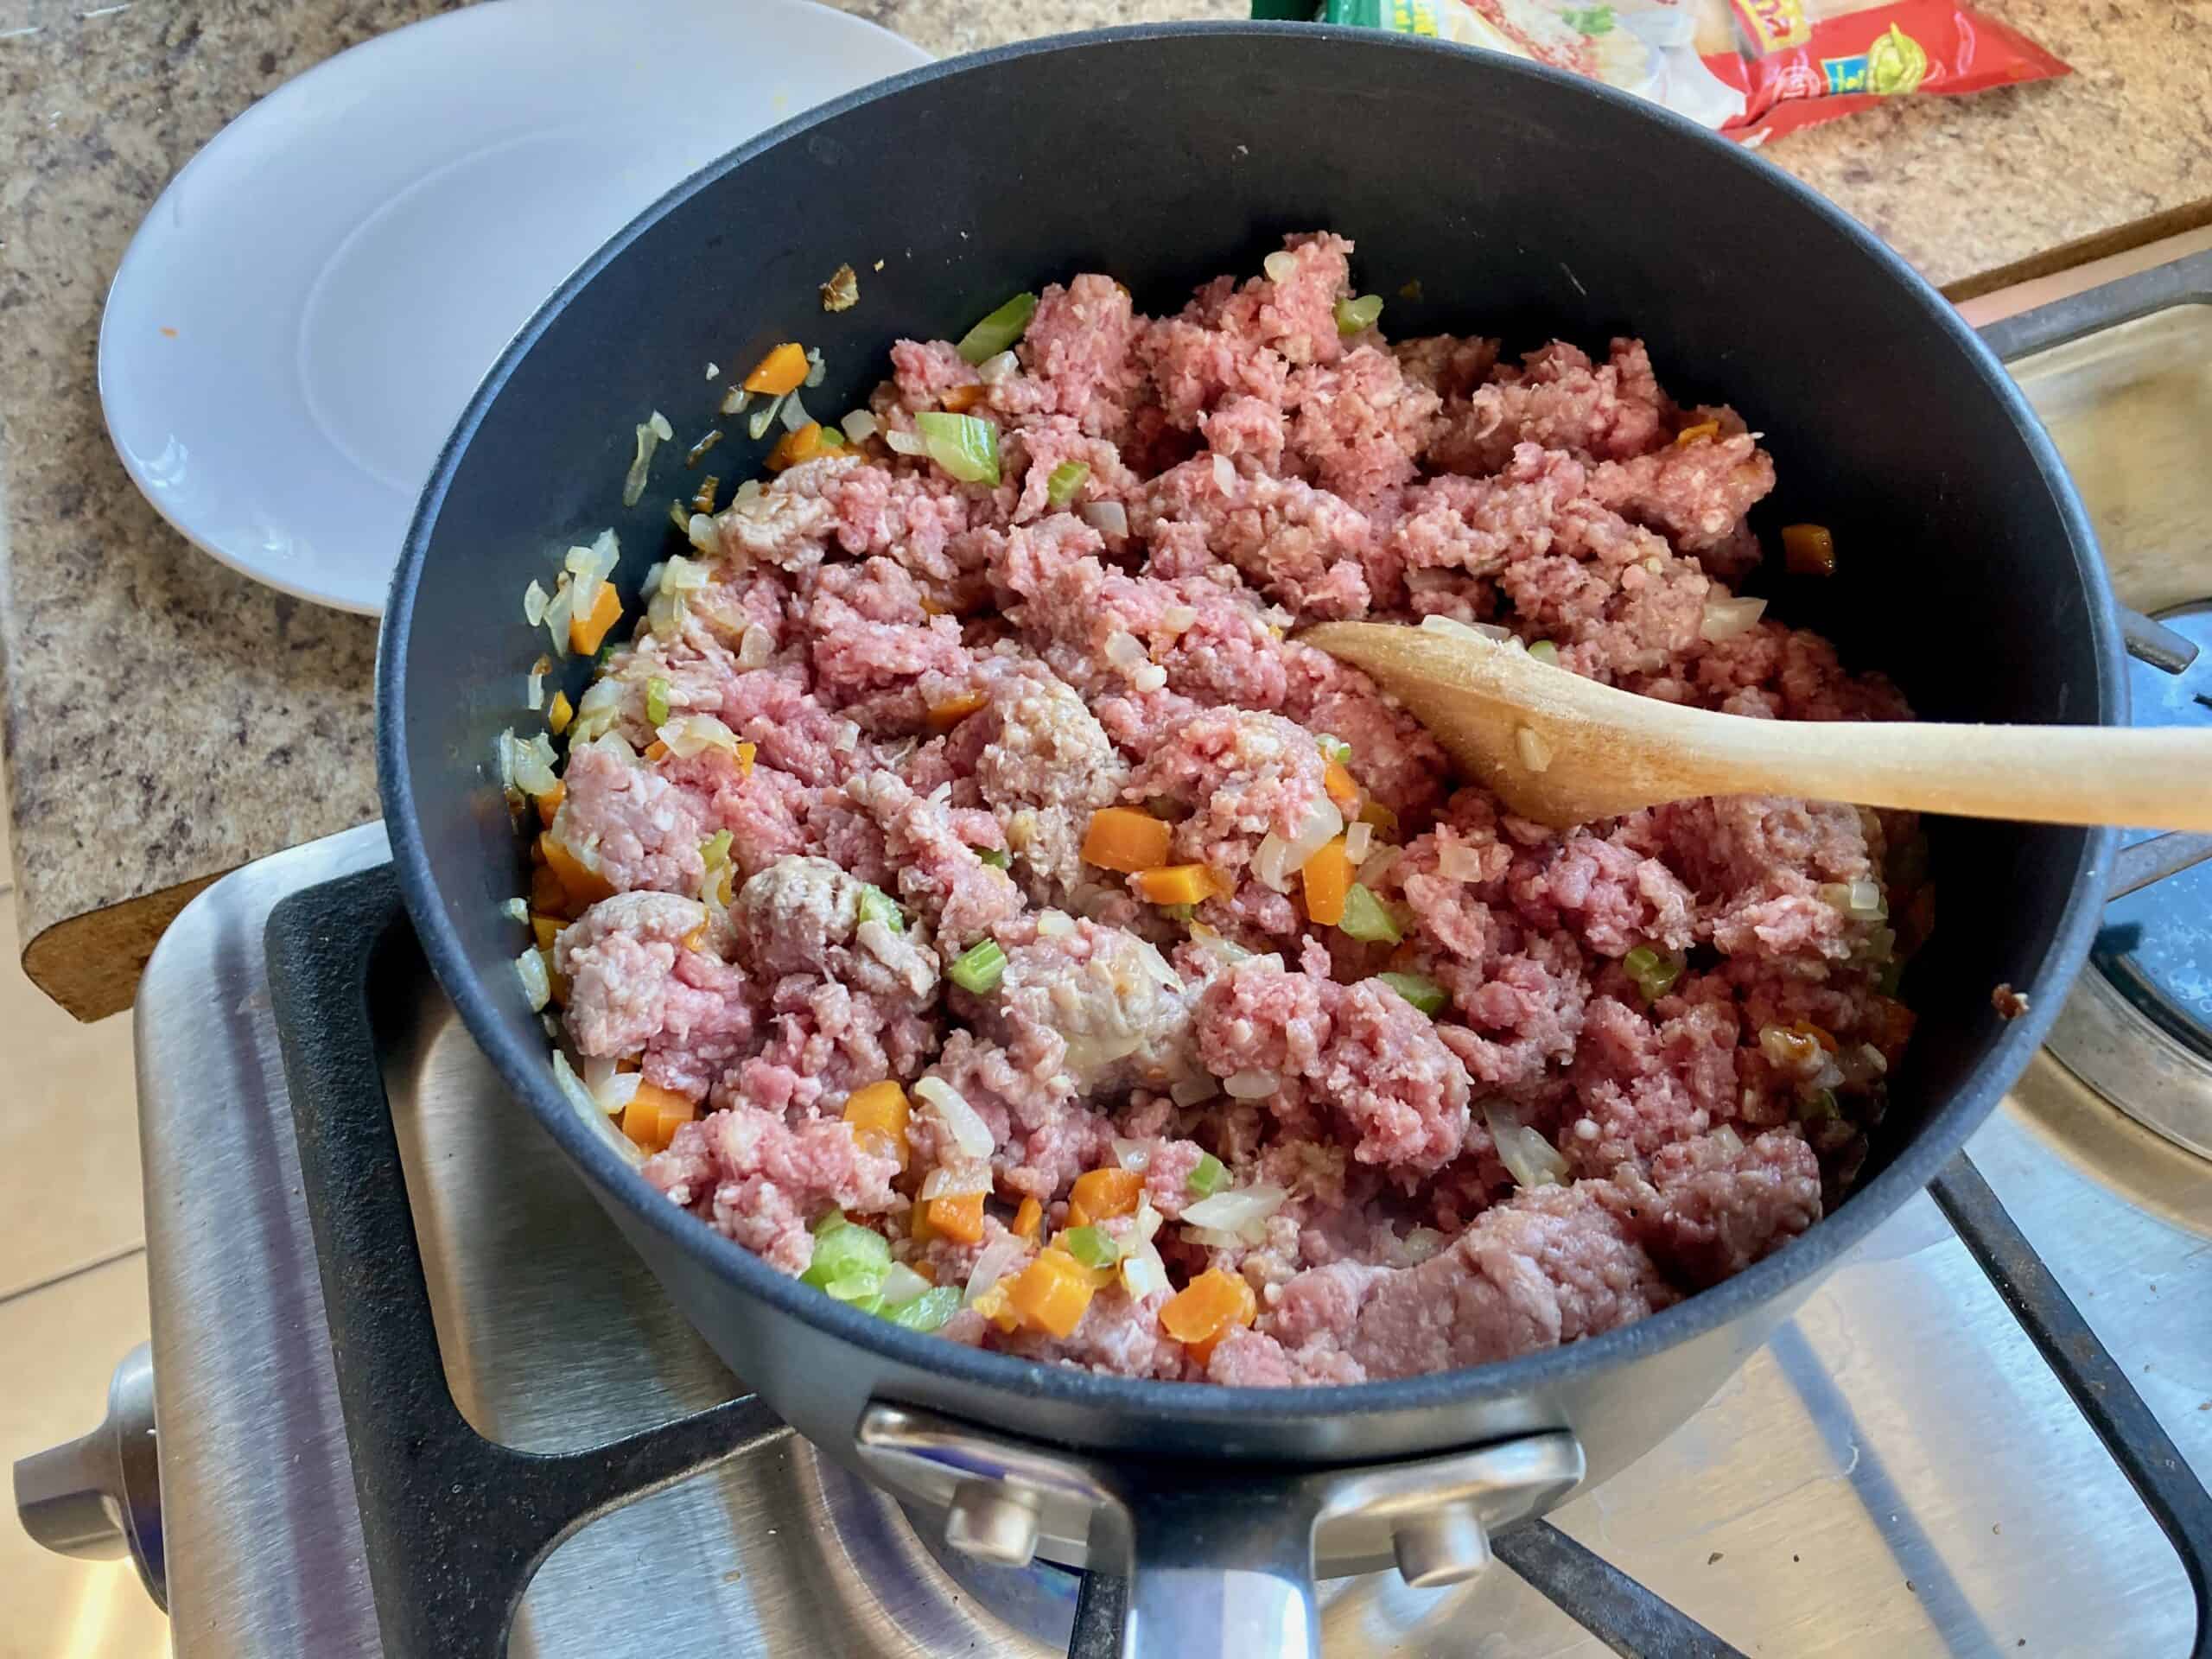 Ground turkey and vegetables in a saucepan on the stove with wooden spoon.